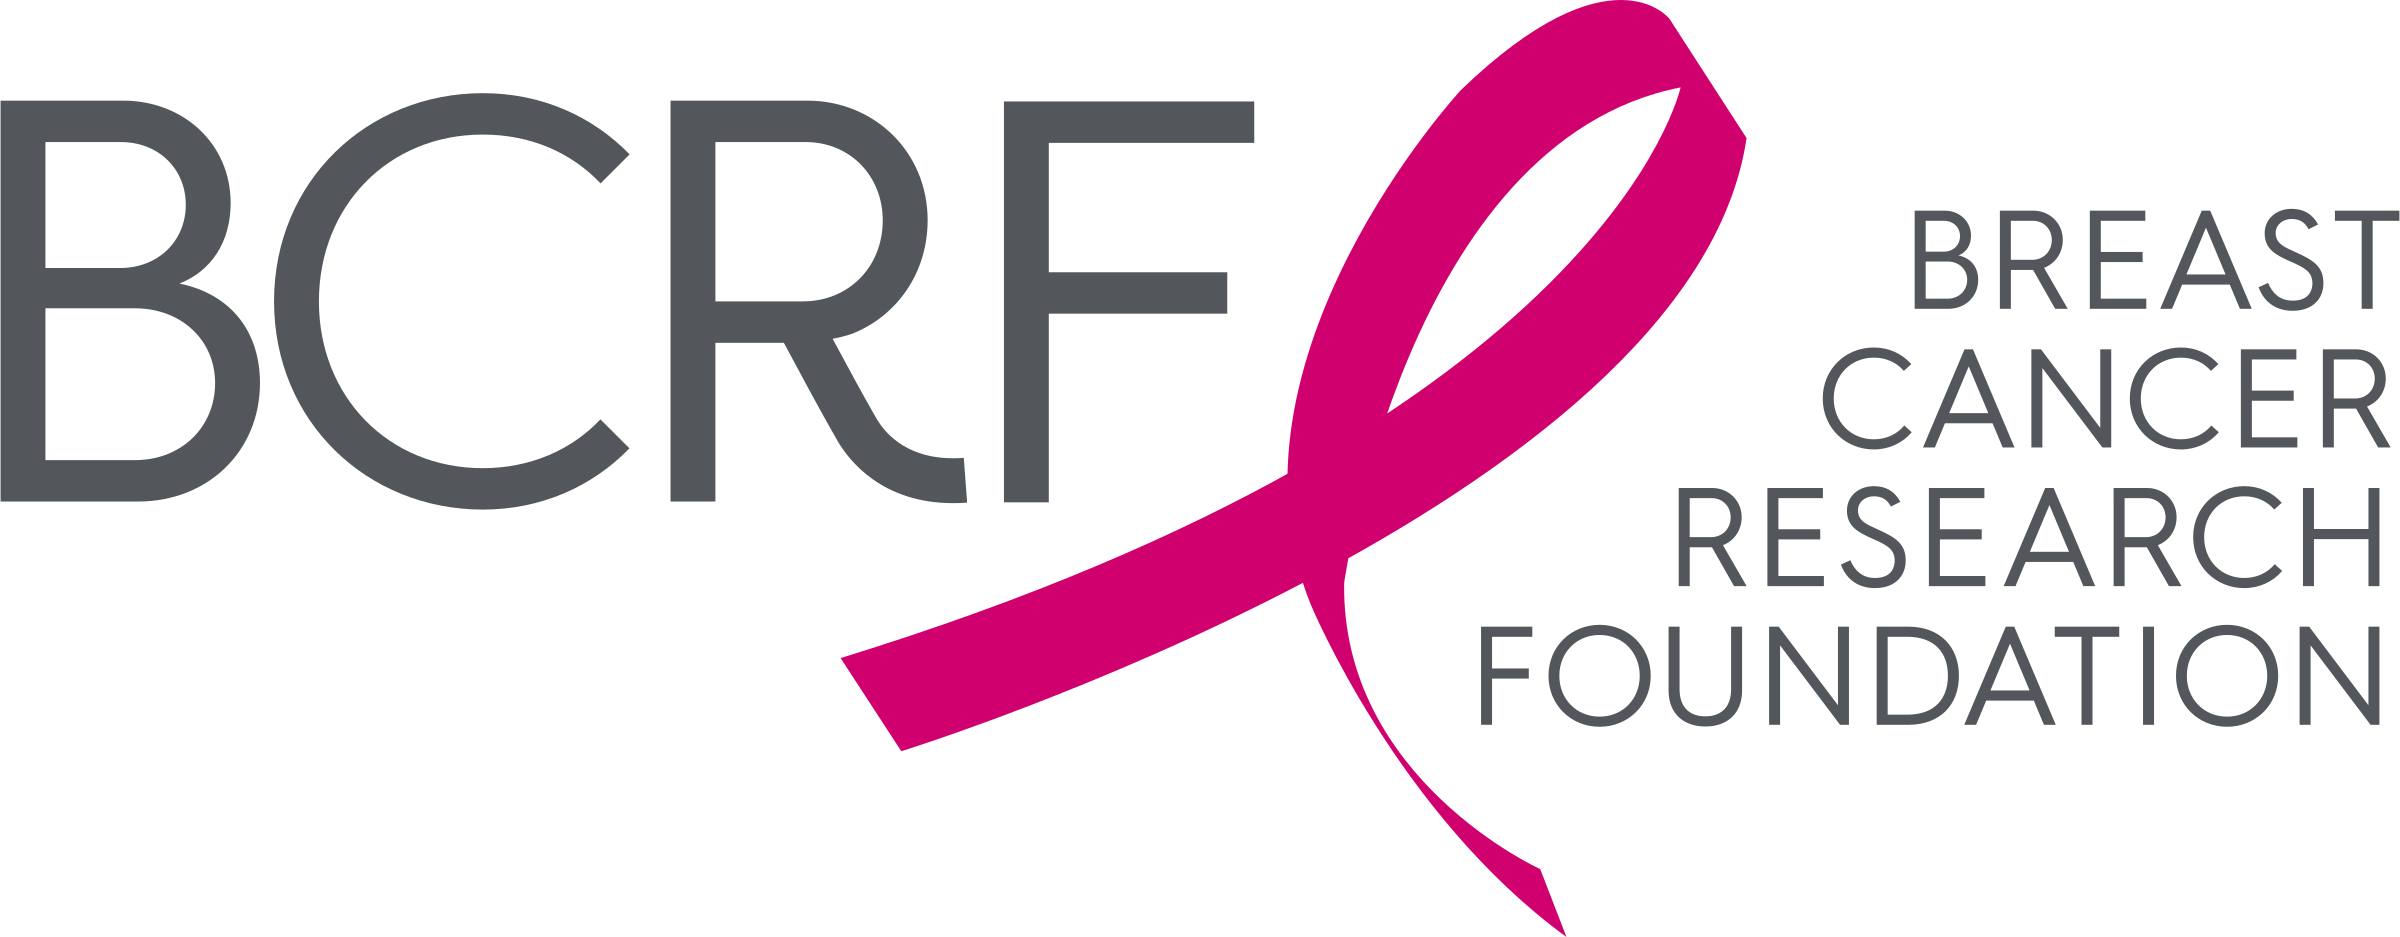 breast cancer research foundation logo png transparent